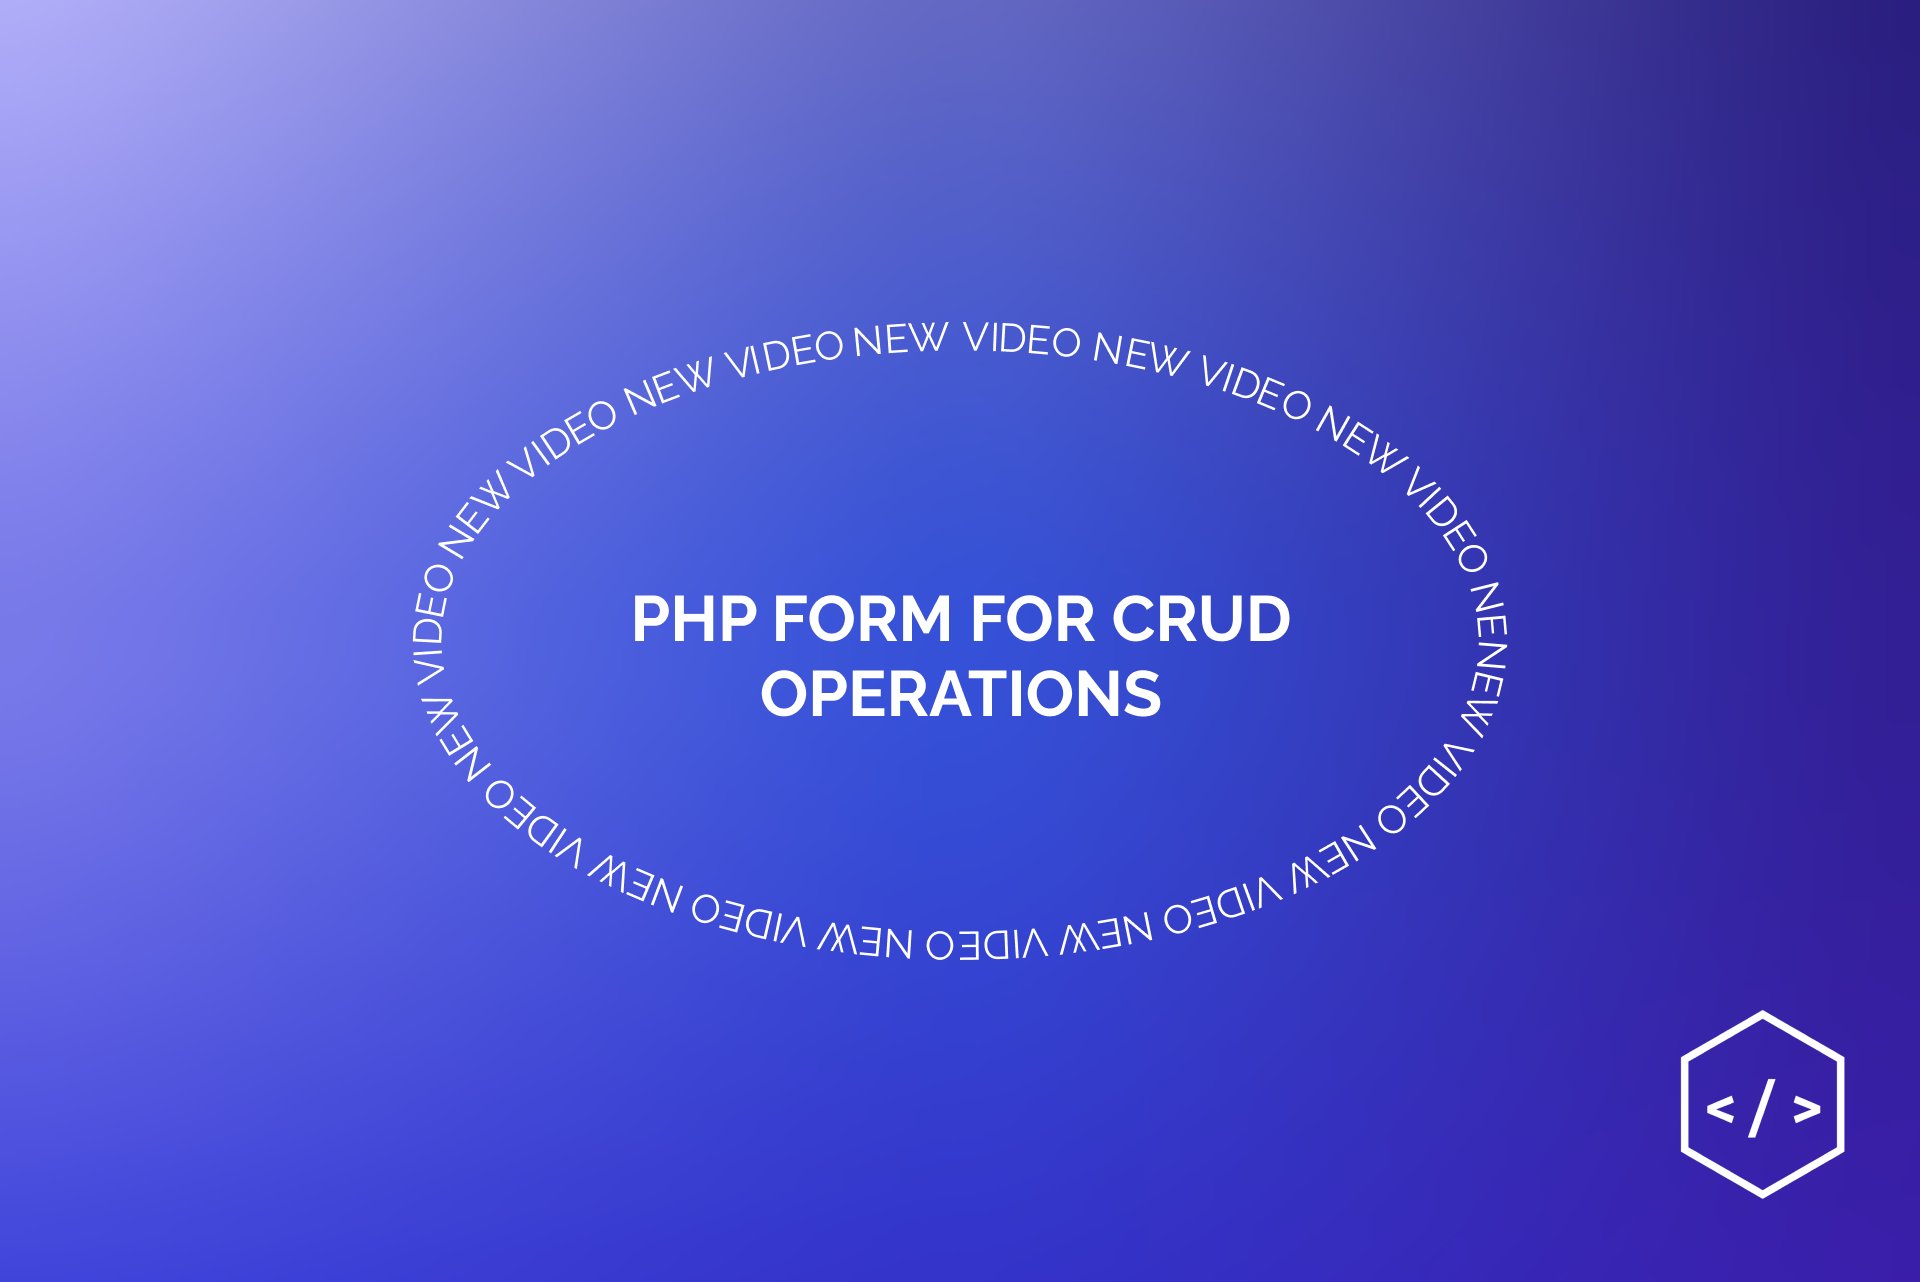 PHP Form for CRUD operations